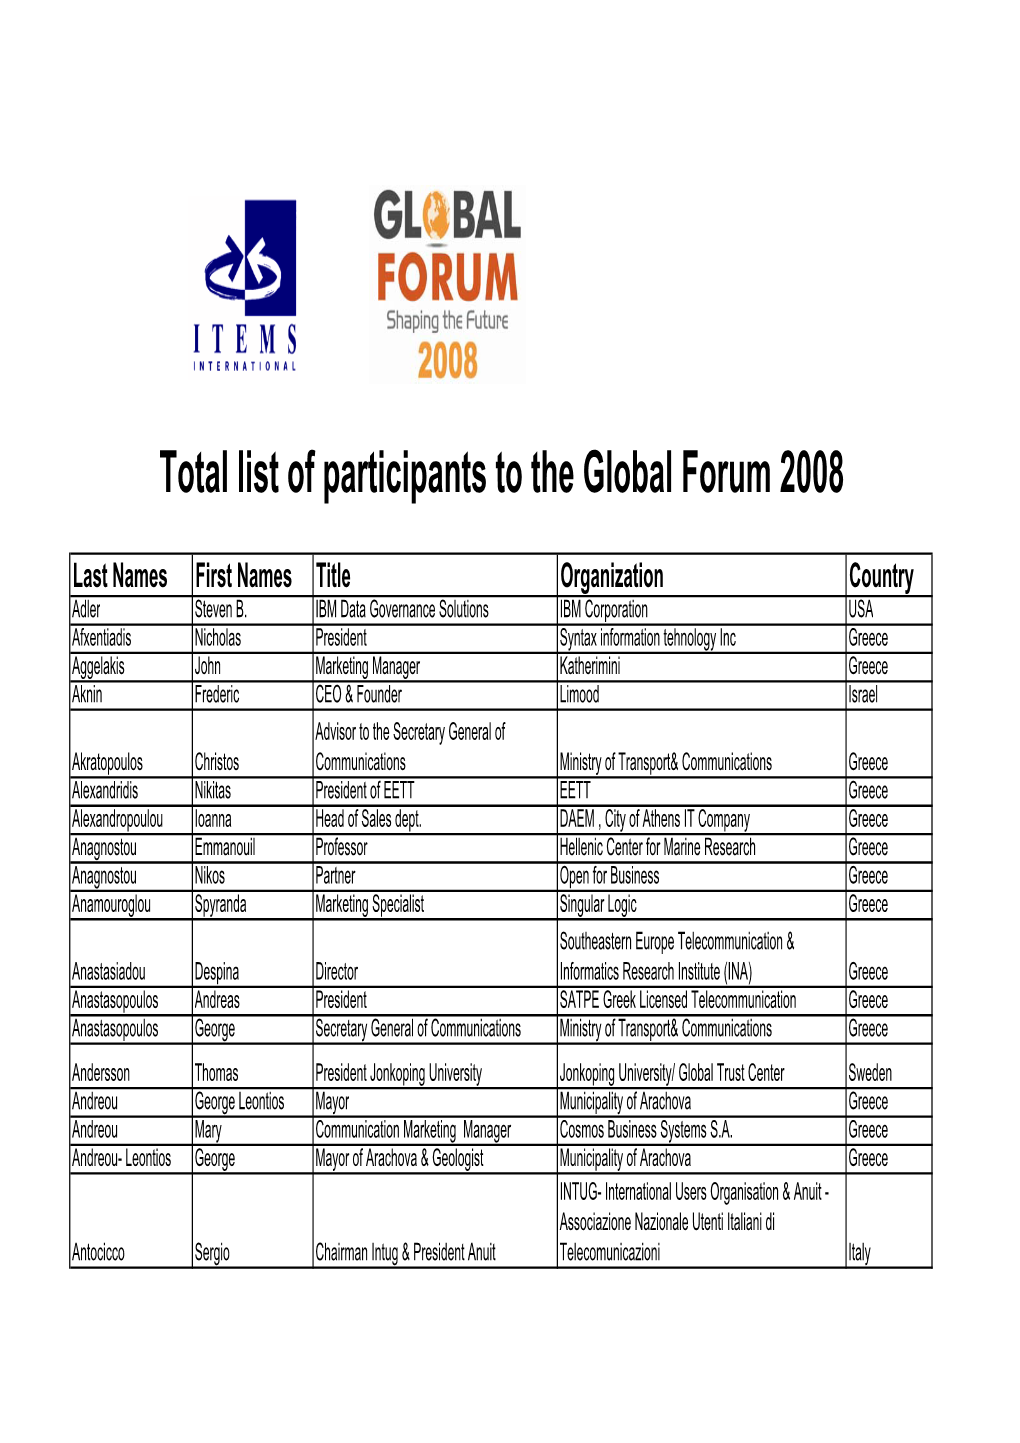 Total List of Participants to the Global Forum 2008